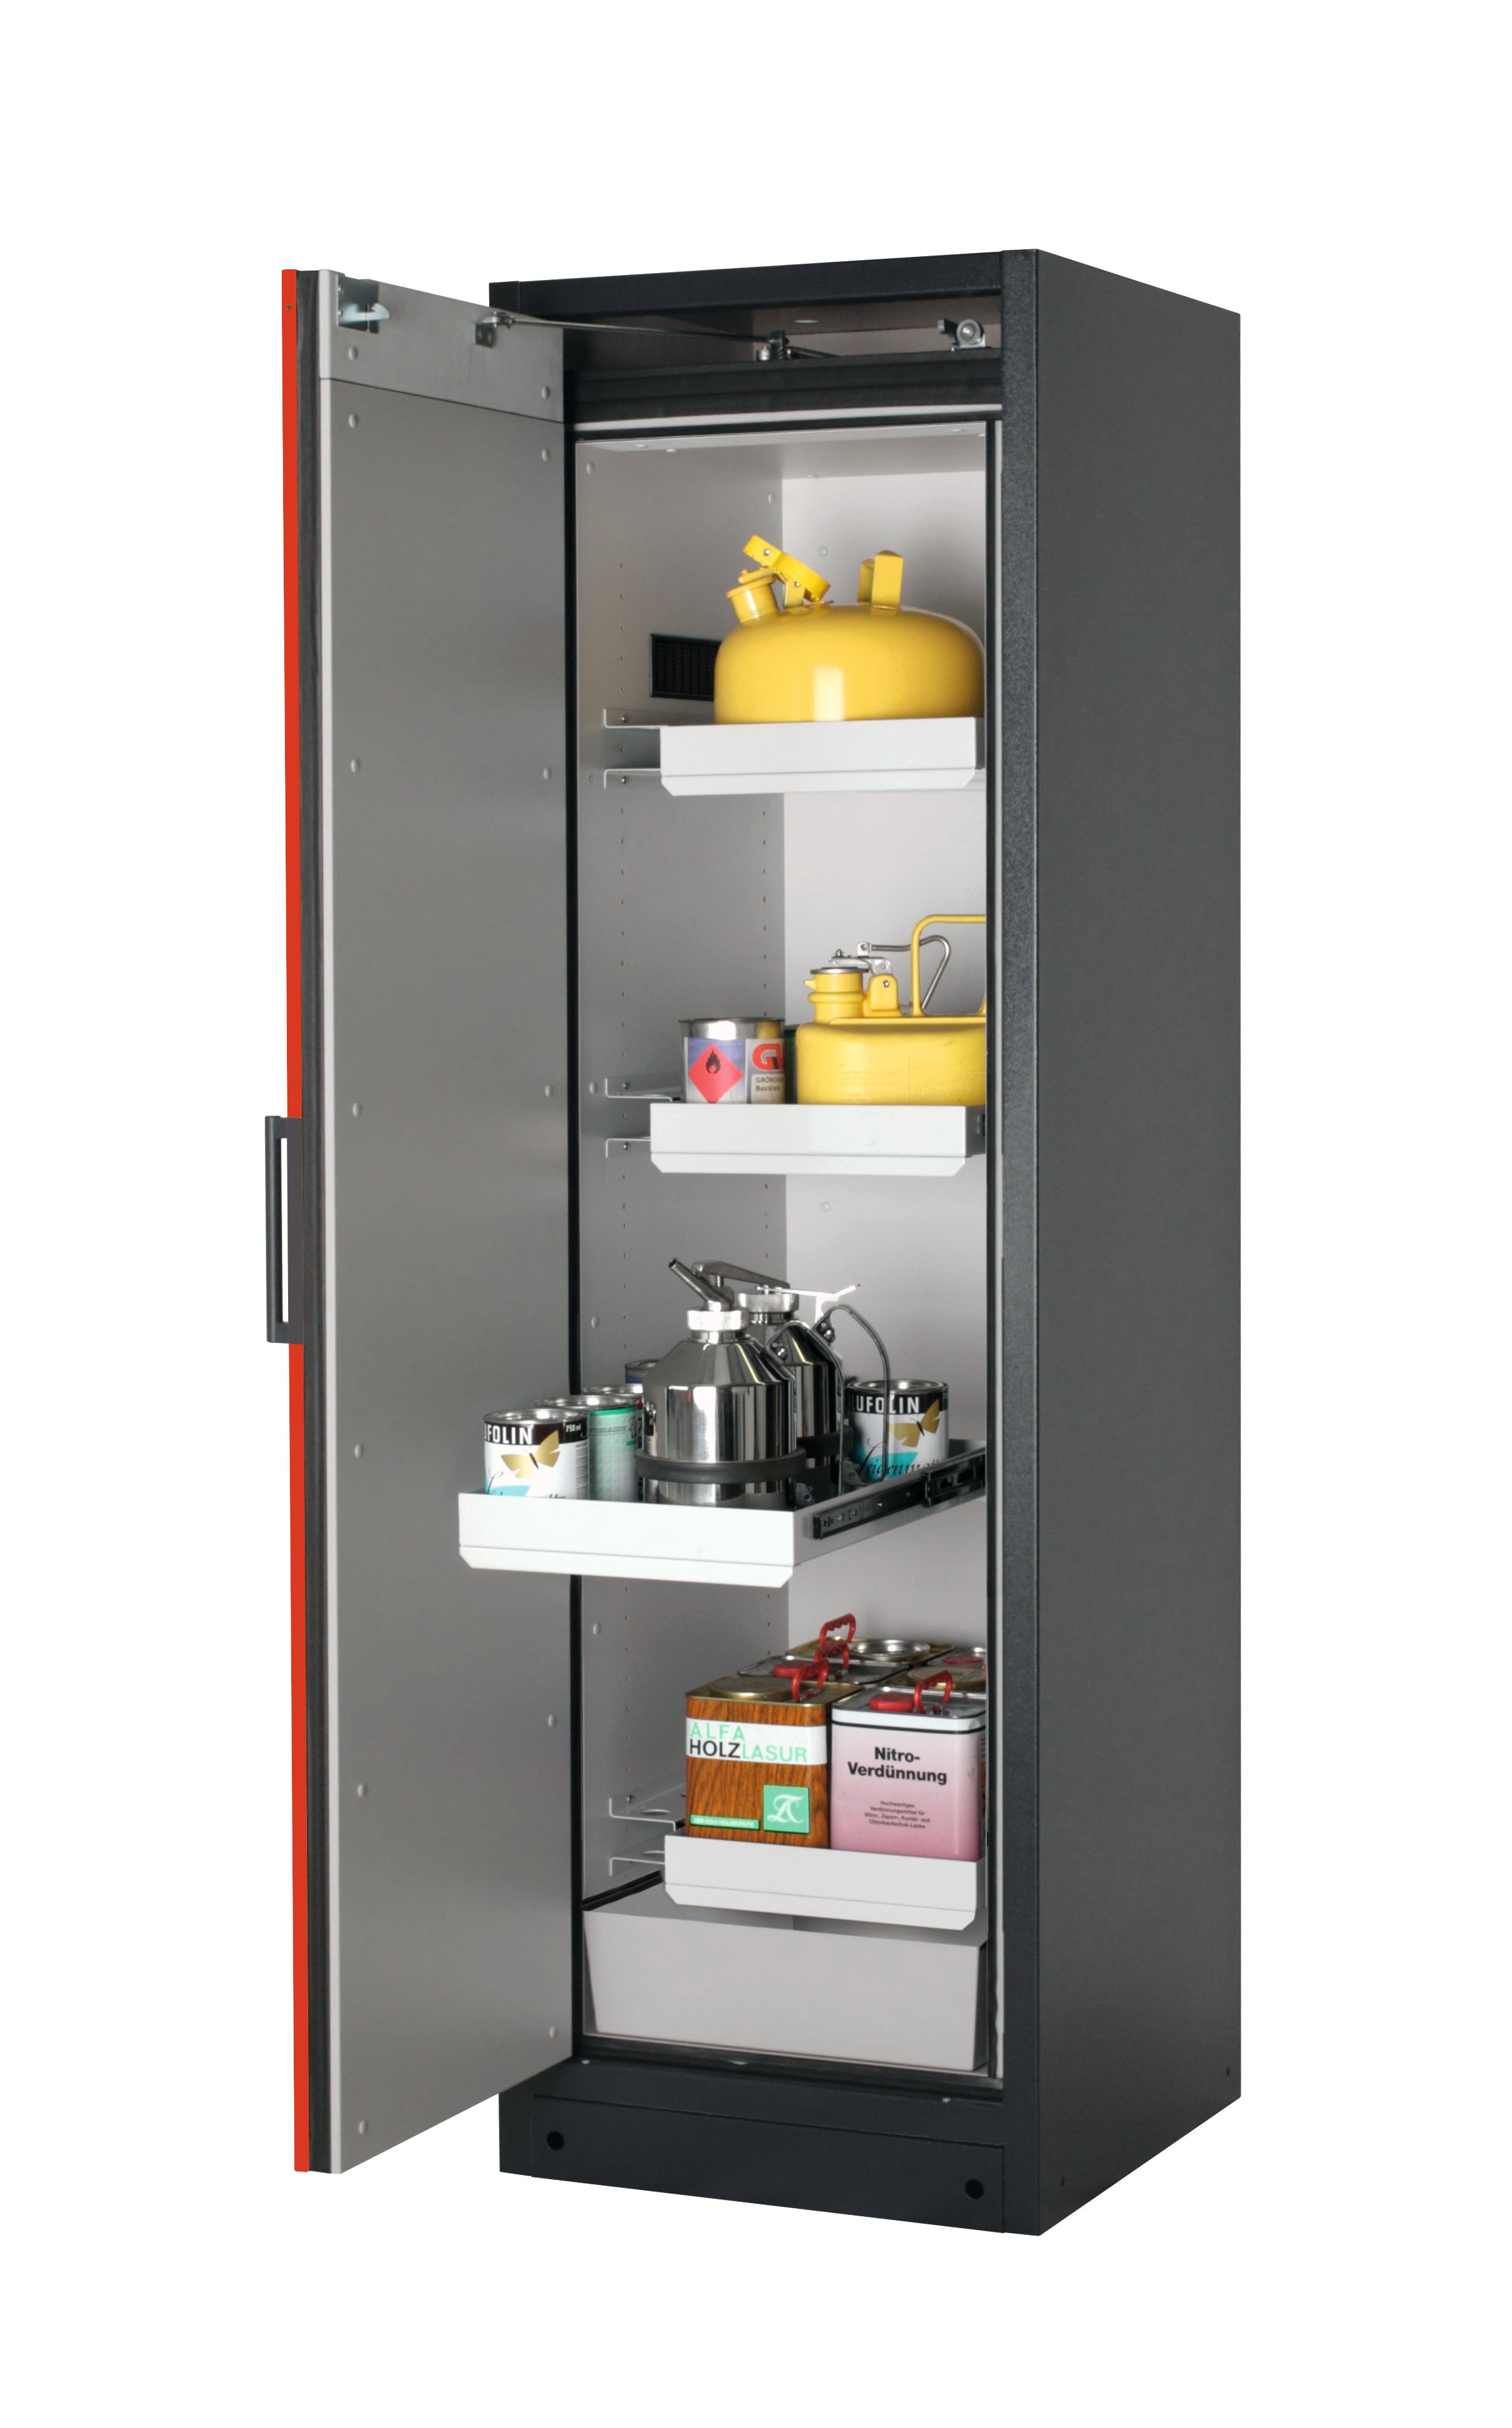 Type 90 safety storage cabinet Q-PEGASUS-90 model Q90.195.060.WDAC in traffic red RAL 3020 with 3x drawer (standard) (sheet steel),